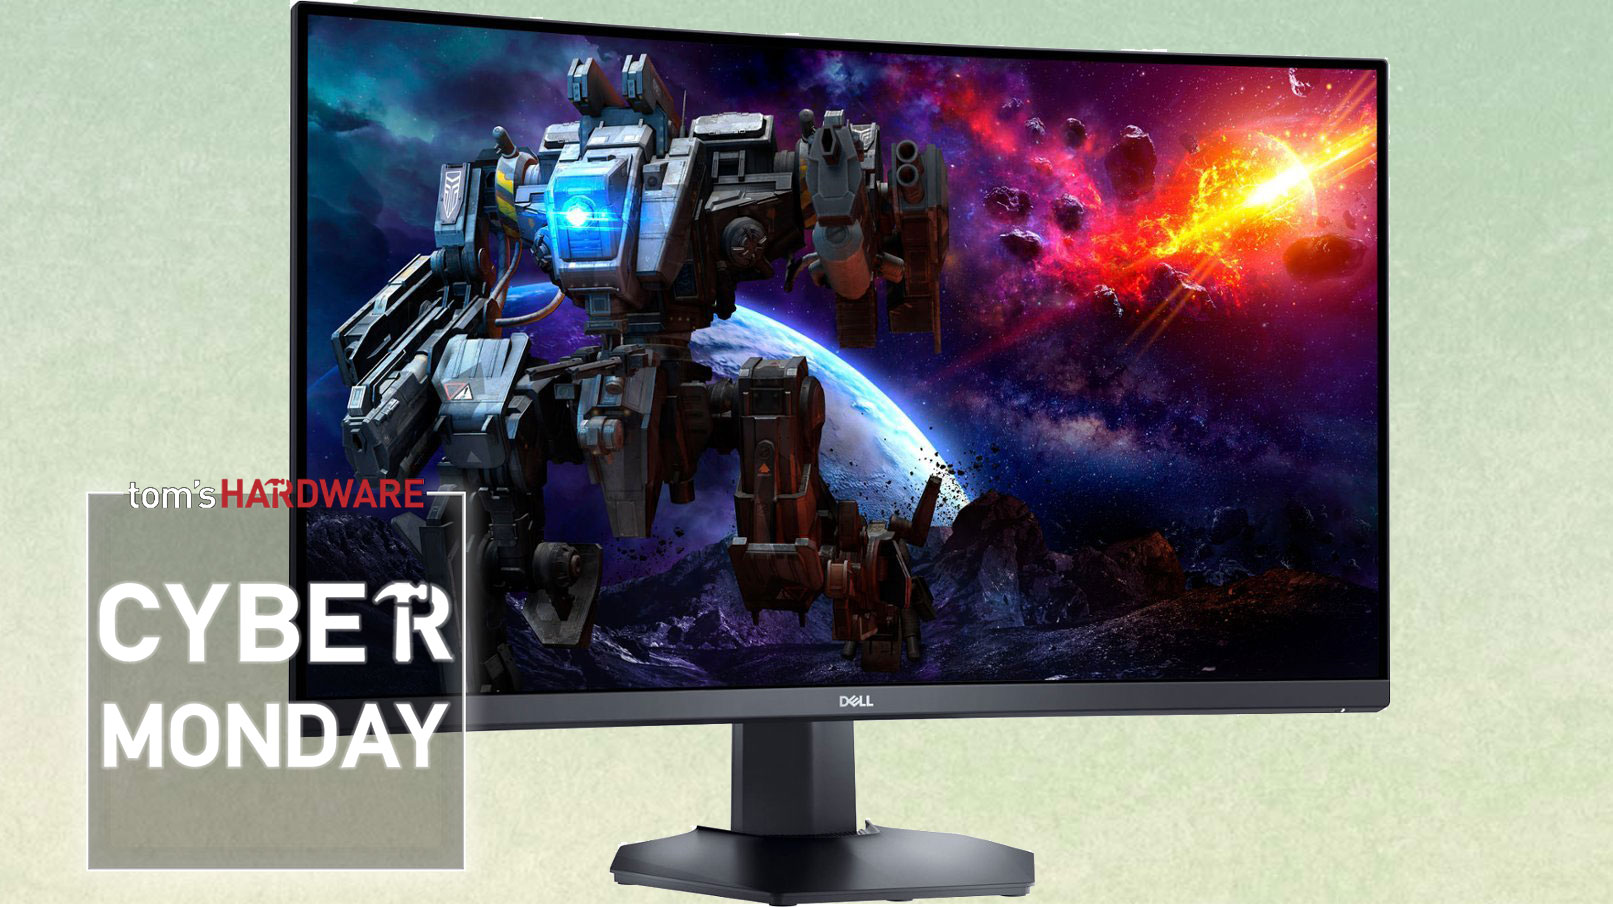 This Cyber Monday Dell gaming monitor is so good, I told my family to buy it